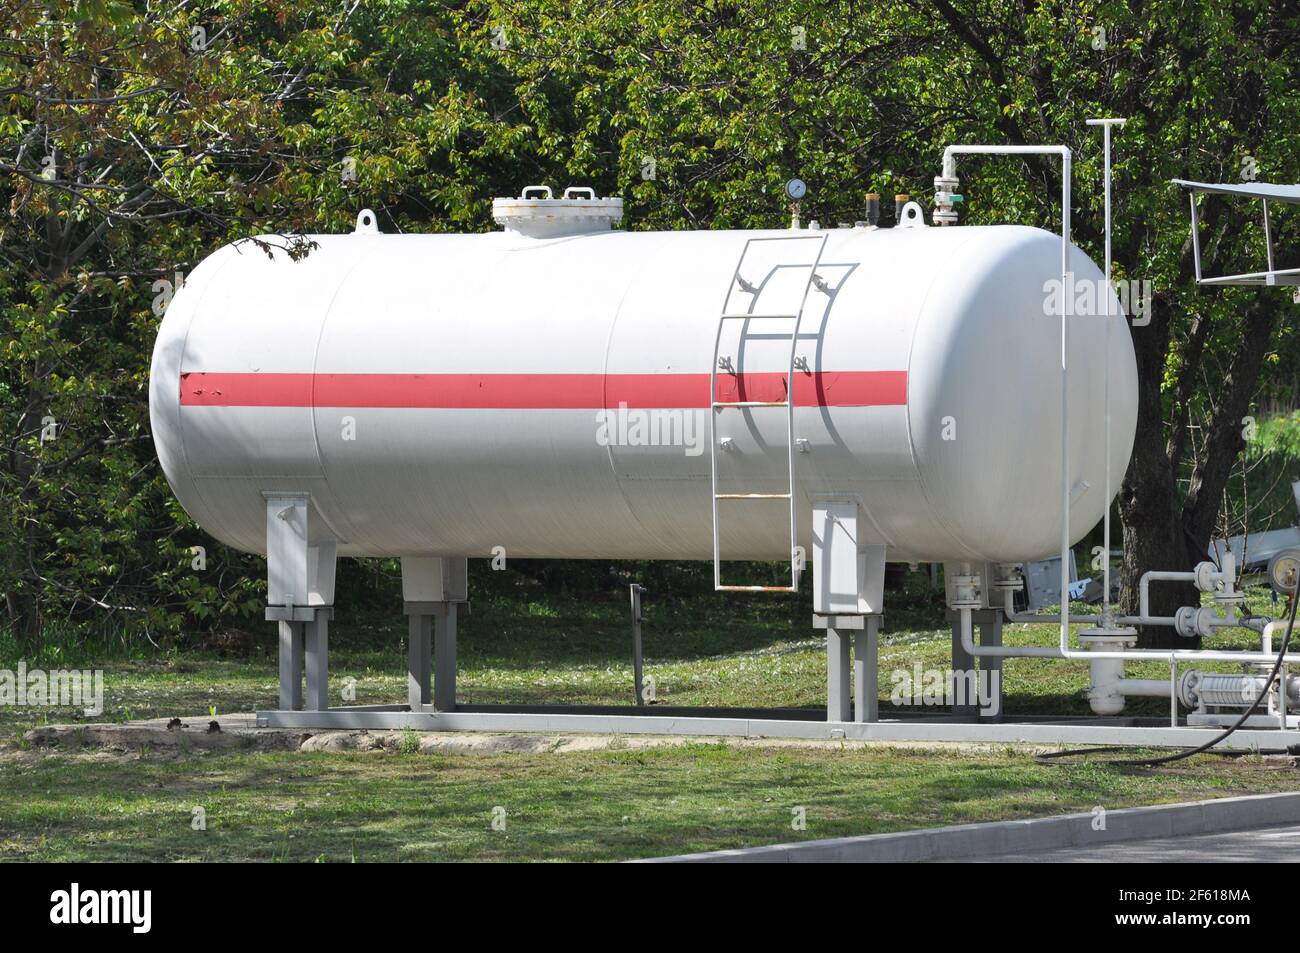 Propane gas station. Station for filling liquefied gas into the vehicle tanks. Environmentally friendly fuel. Gas station fuel tank. Stock Photo